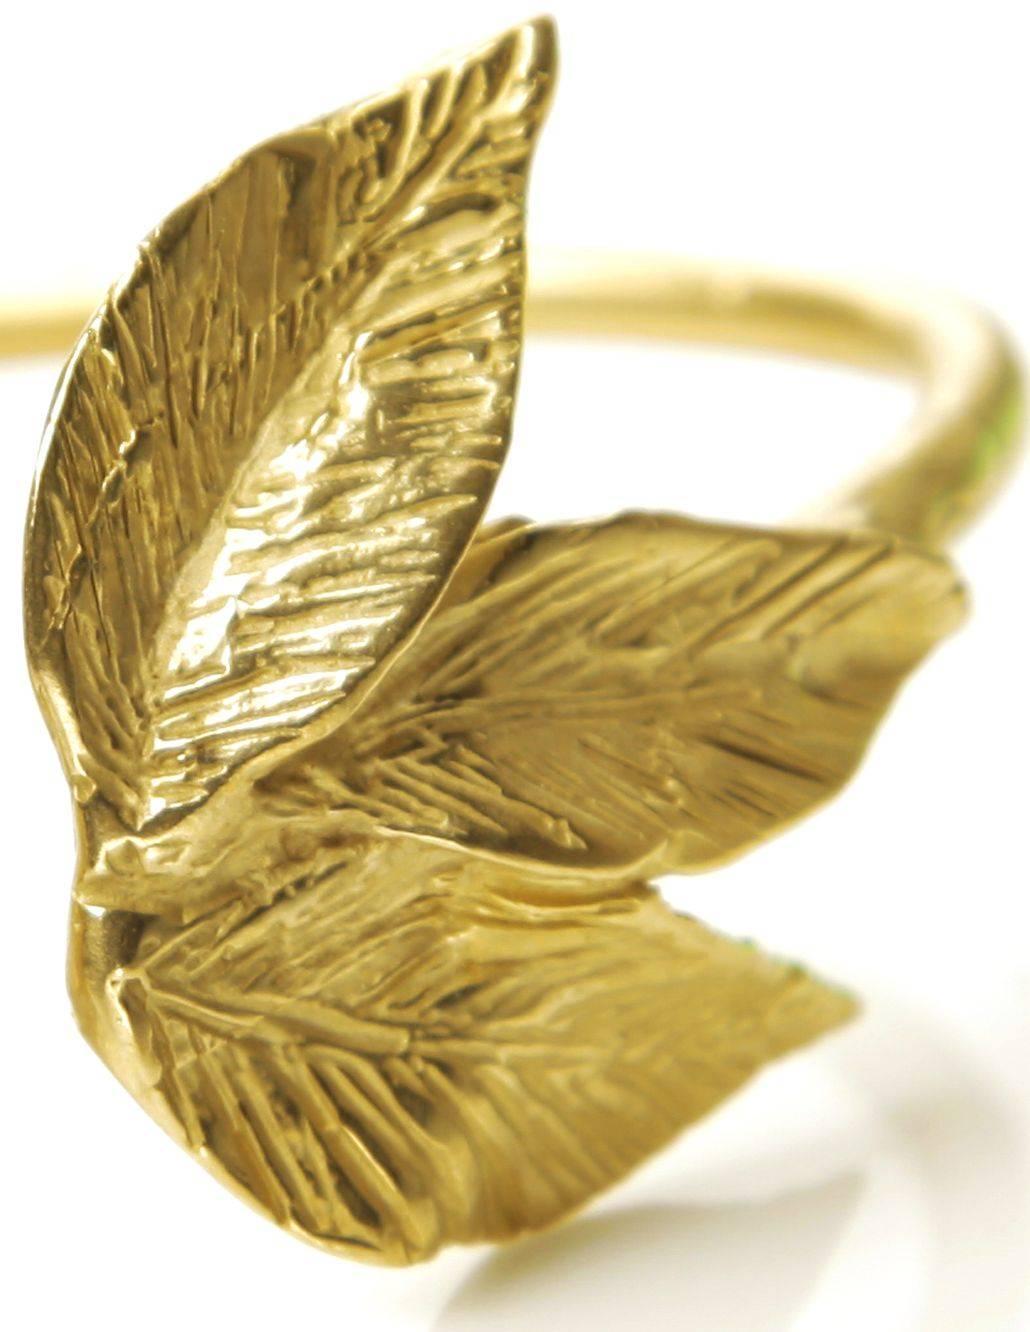 This is a beautiful bracelet that is handmade in Italy with a lost wax technique. Completely inspired by nature, in particular to light which gives vitality to the material. Giulia Barela jewelry is characterized, stylistically, from strong